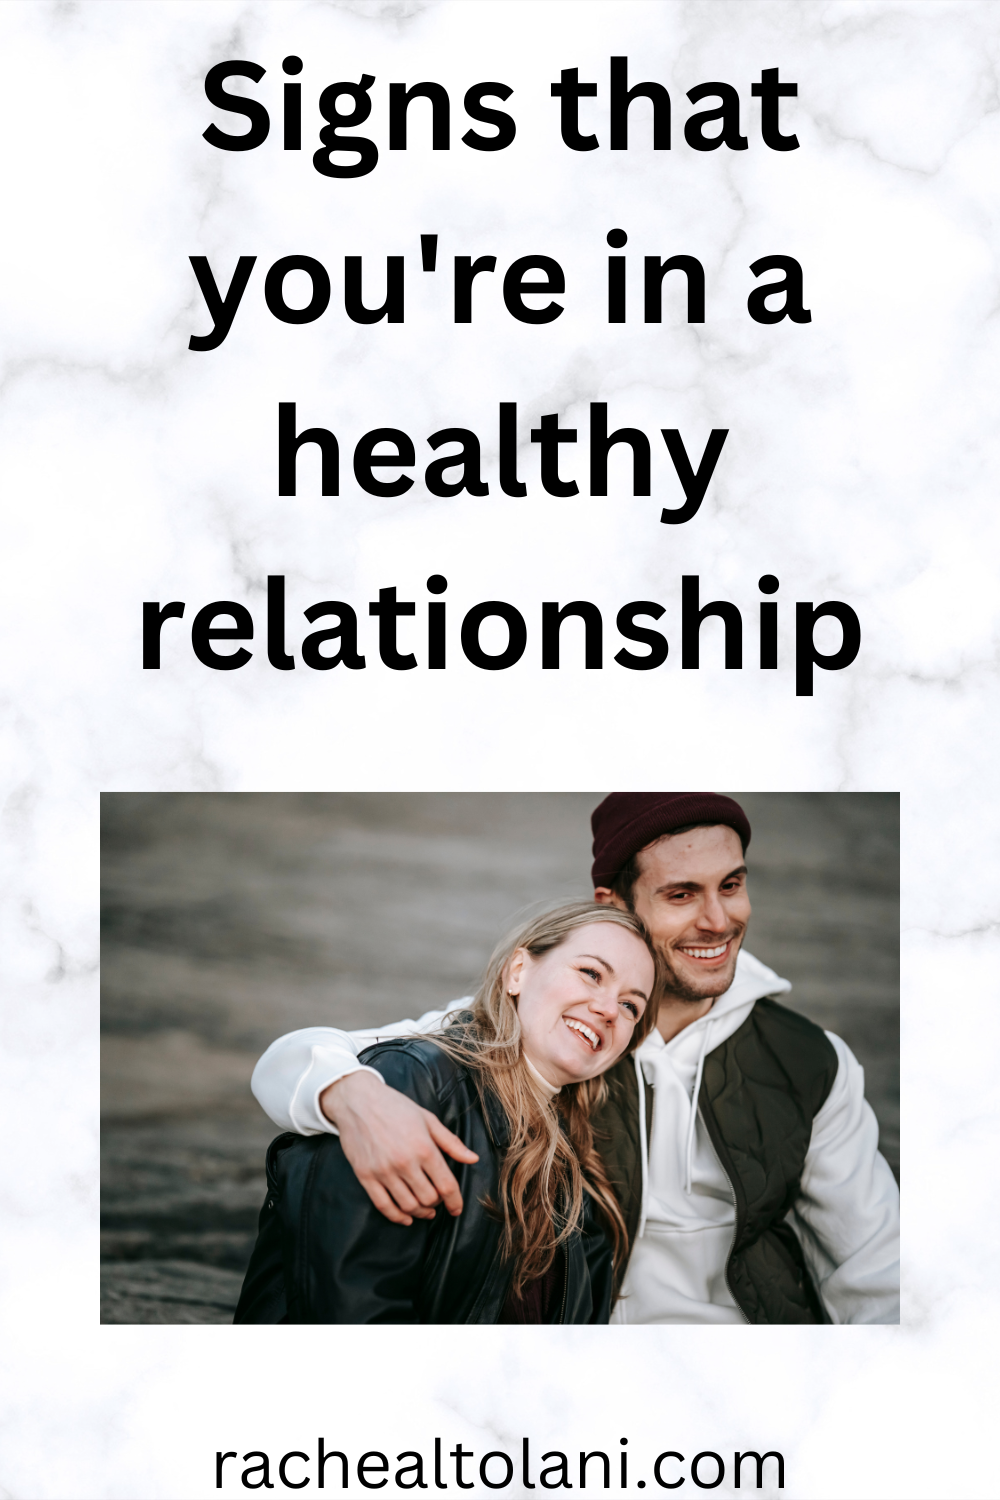 Signs of a healthy relationship